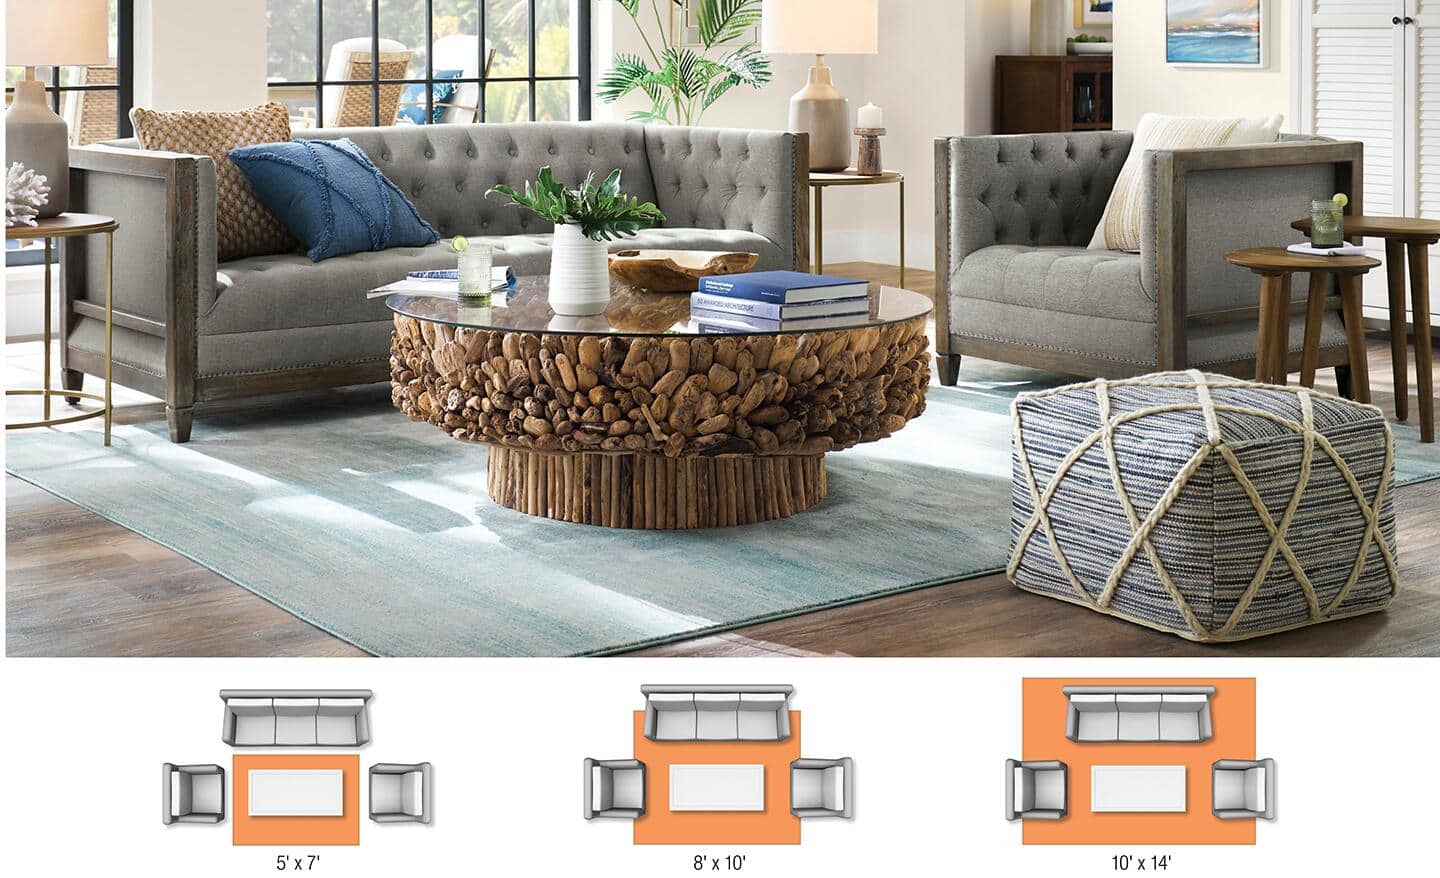 Rug Placement And Size For Your Living Room Area - Furnishings4Less